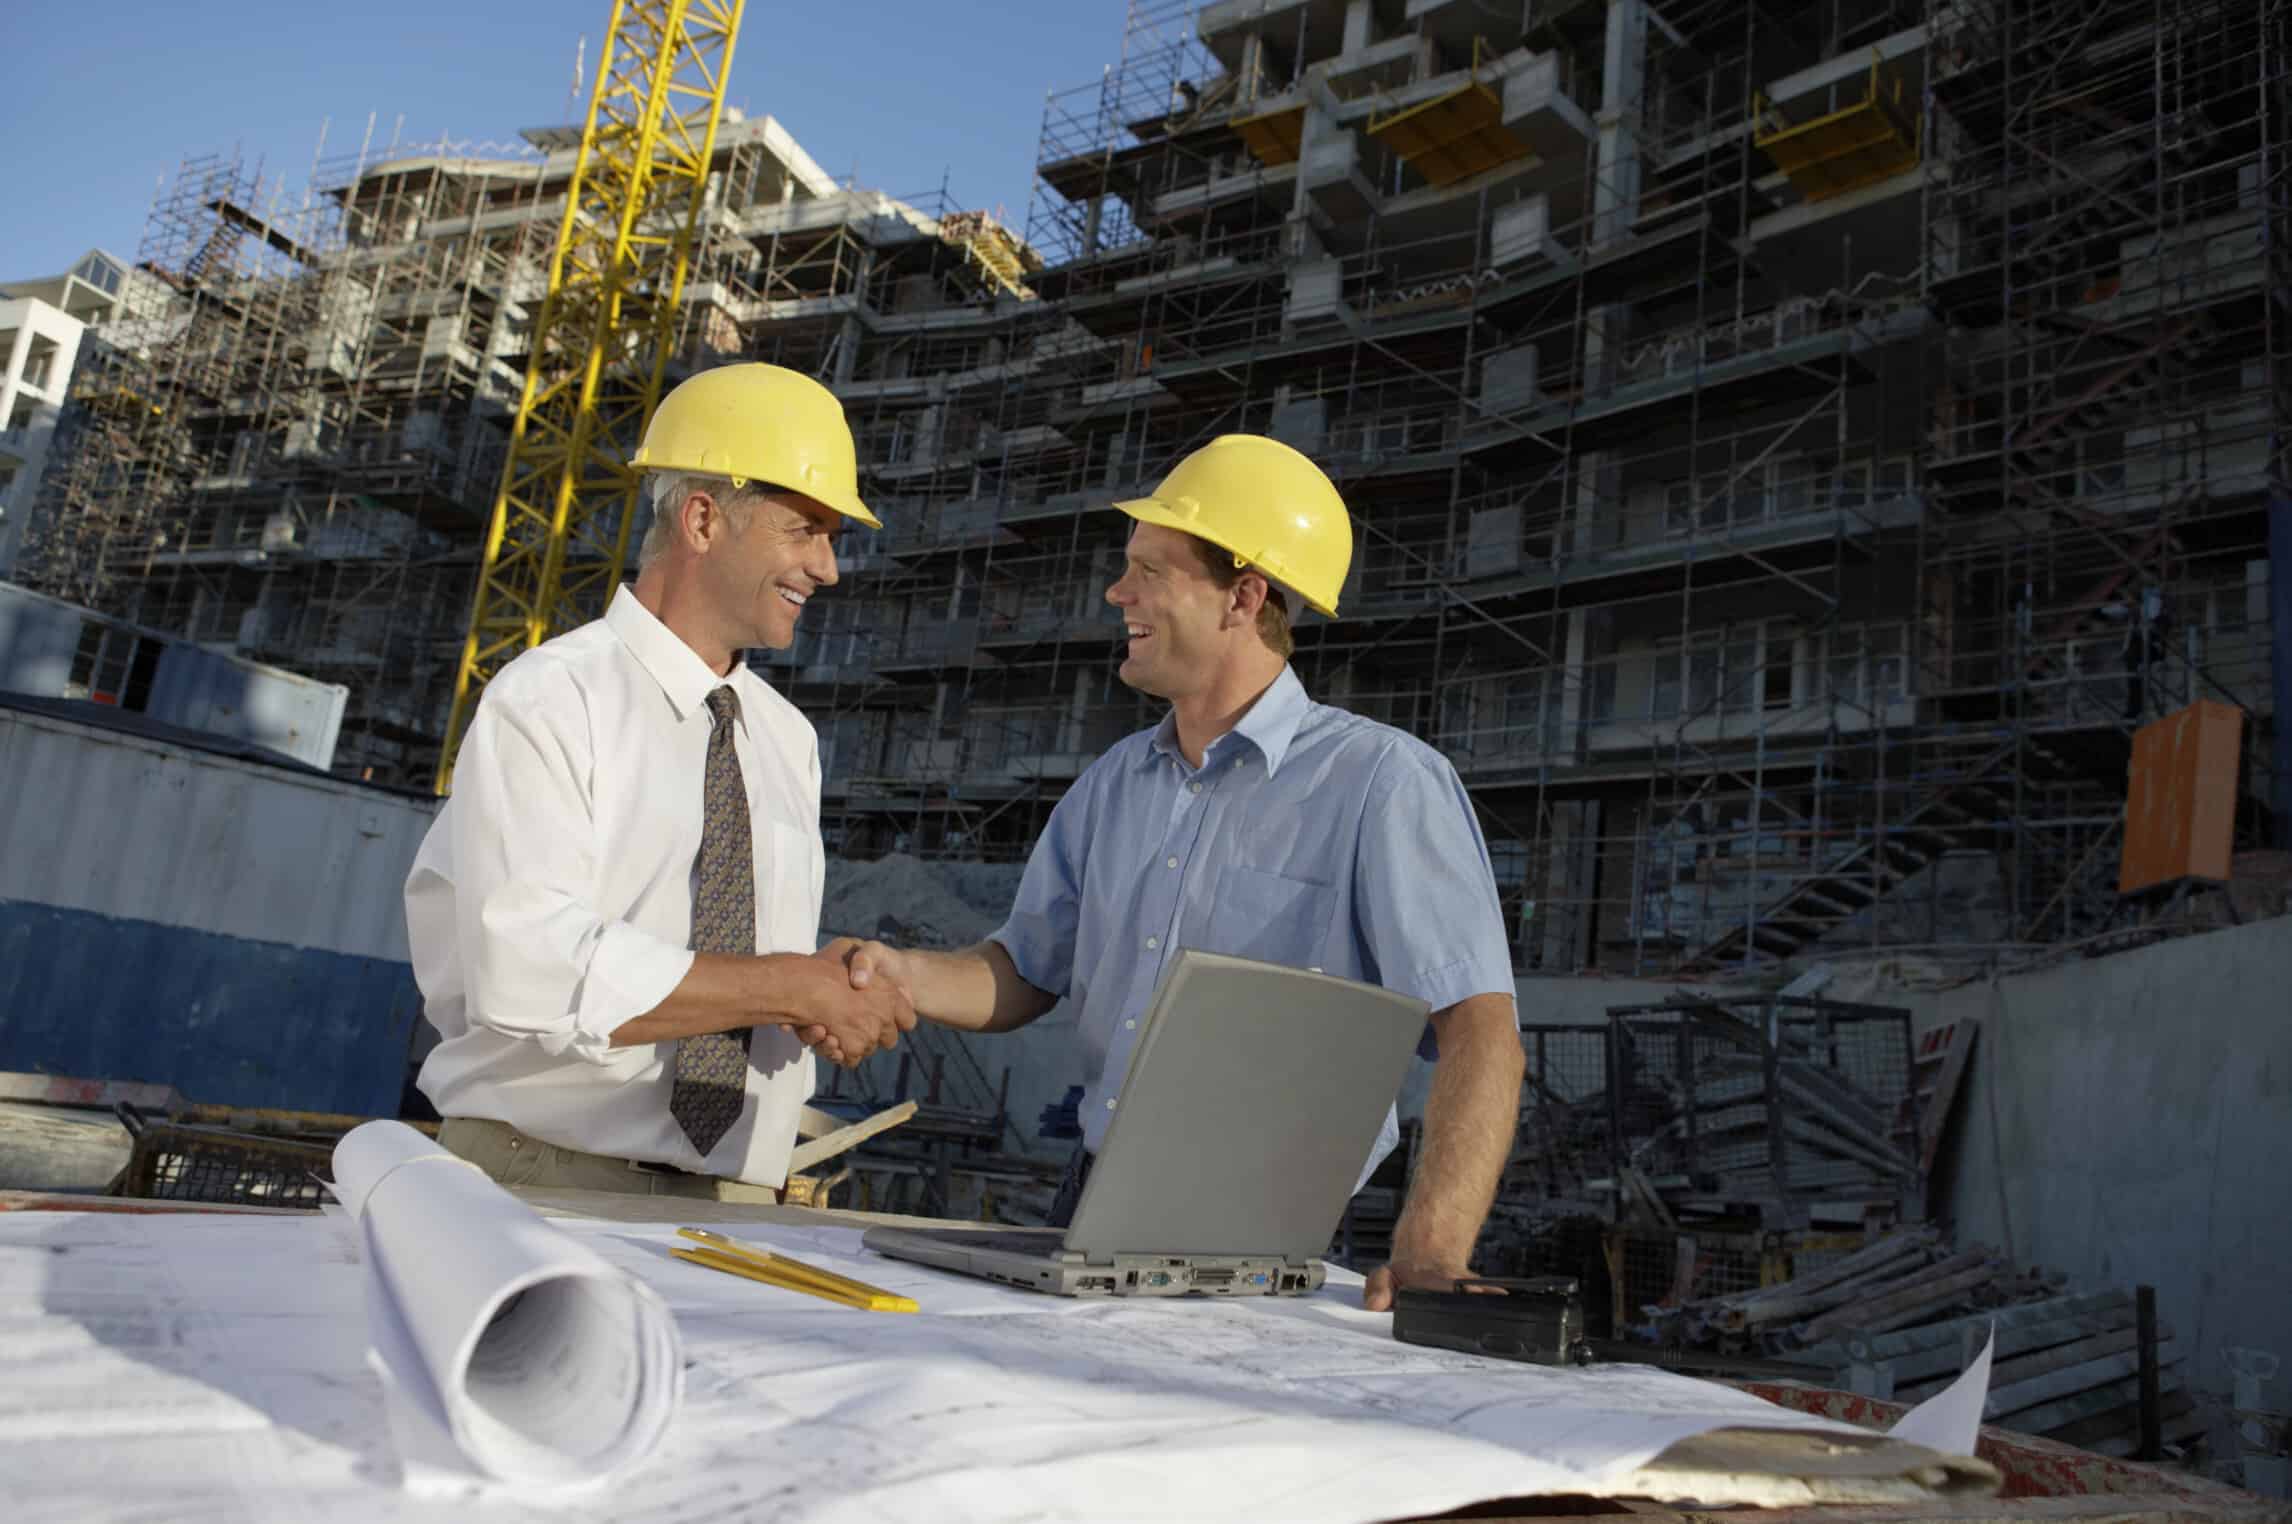 men-shaking-hands-in-hard-hats-on-construction-site